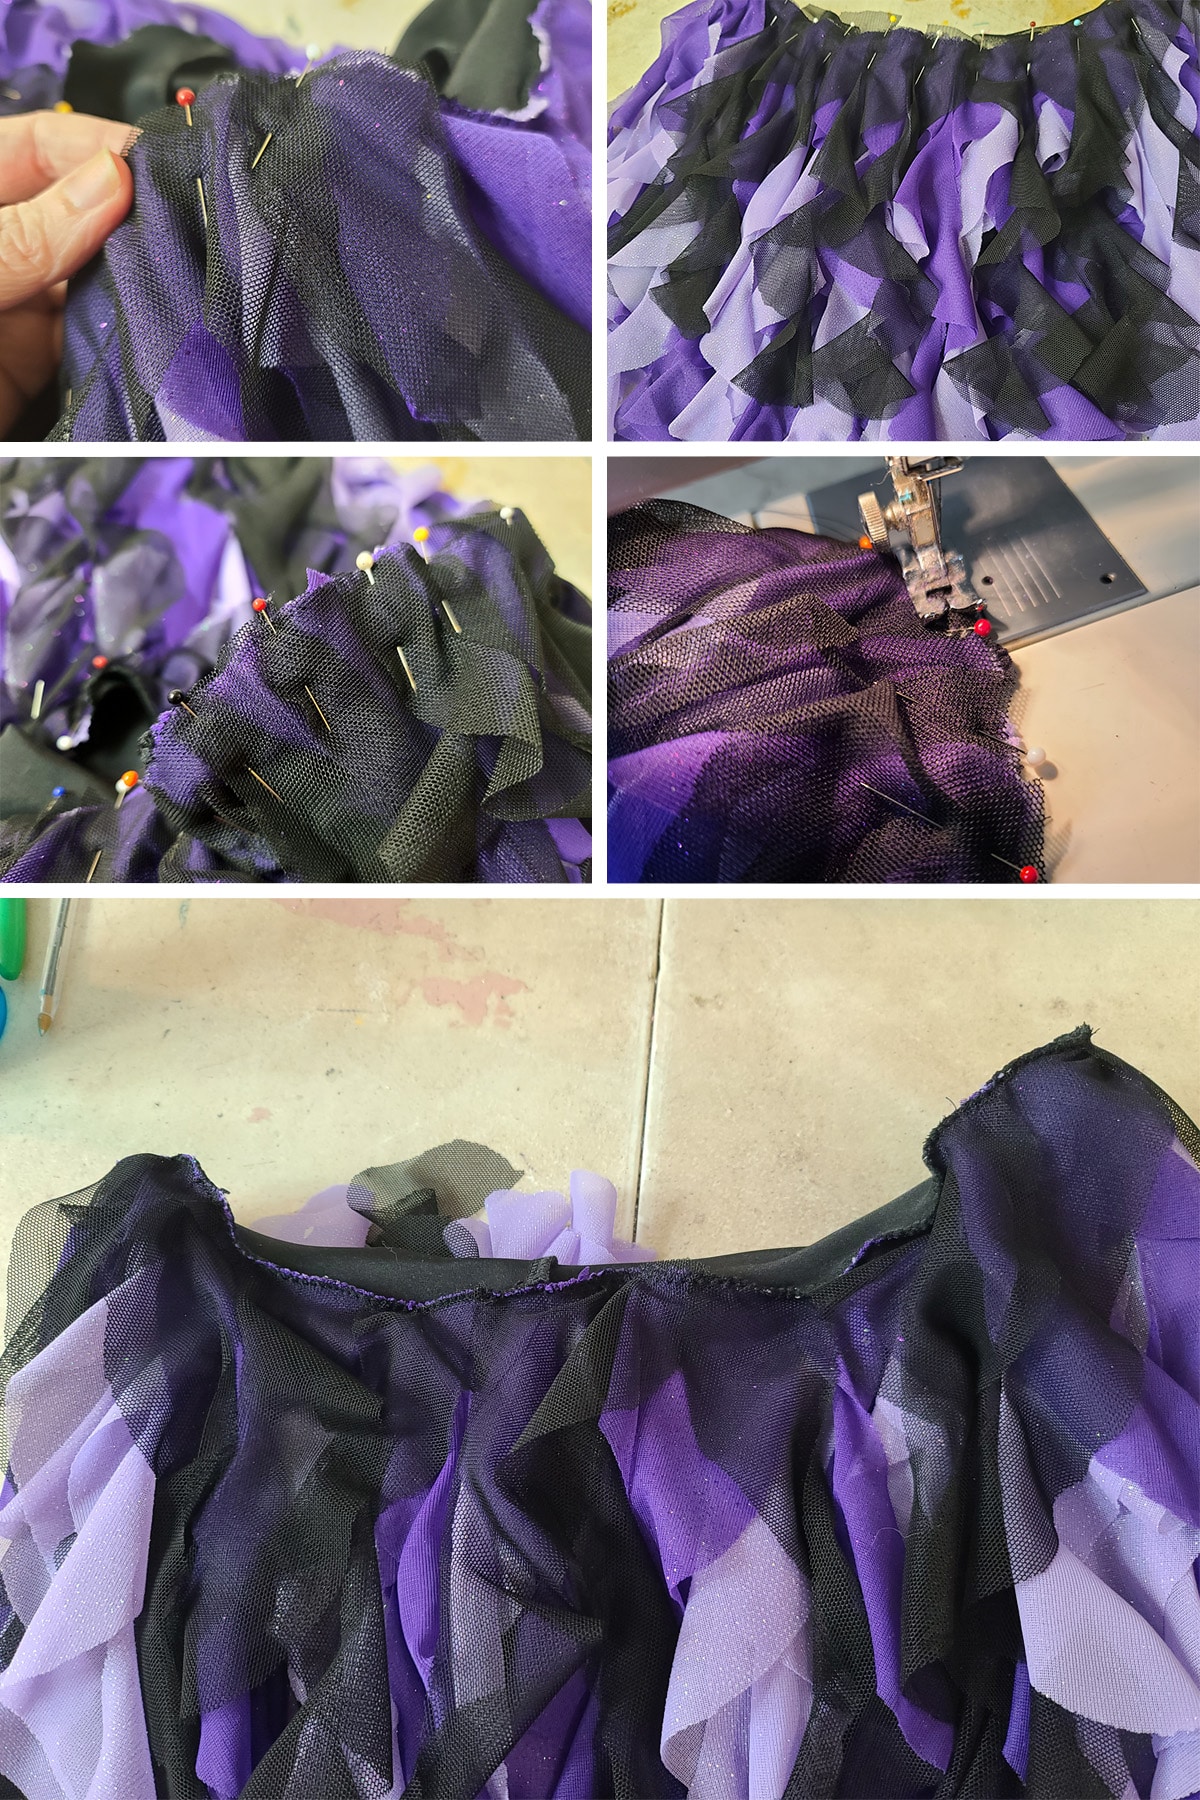 A 5 part image showing black ruffles being added on top of the purple ones and stitched down.